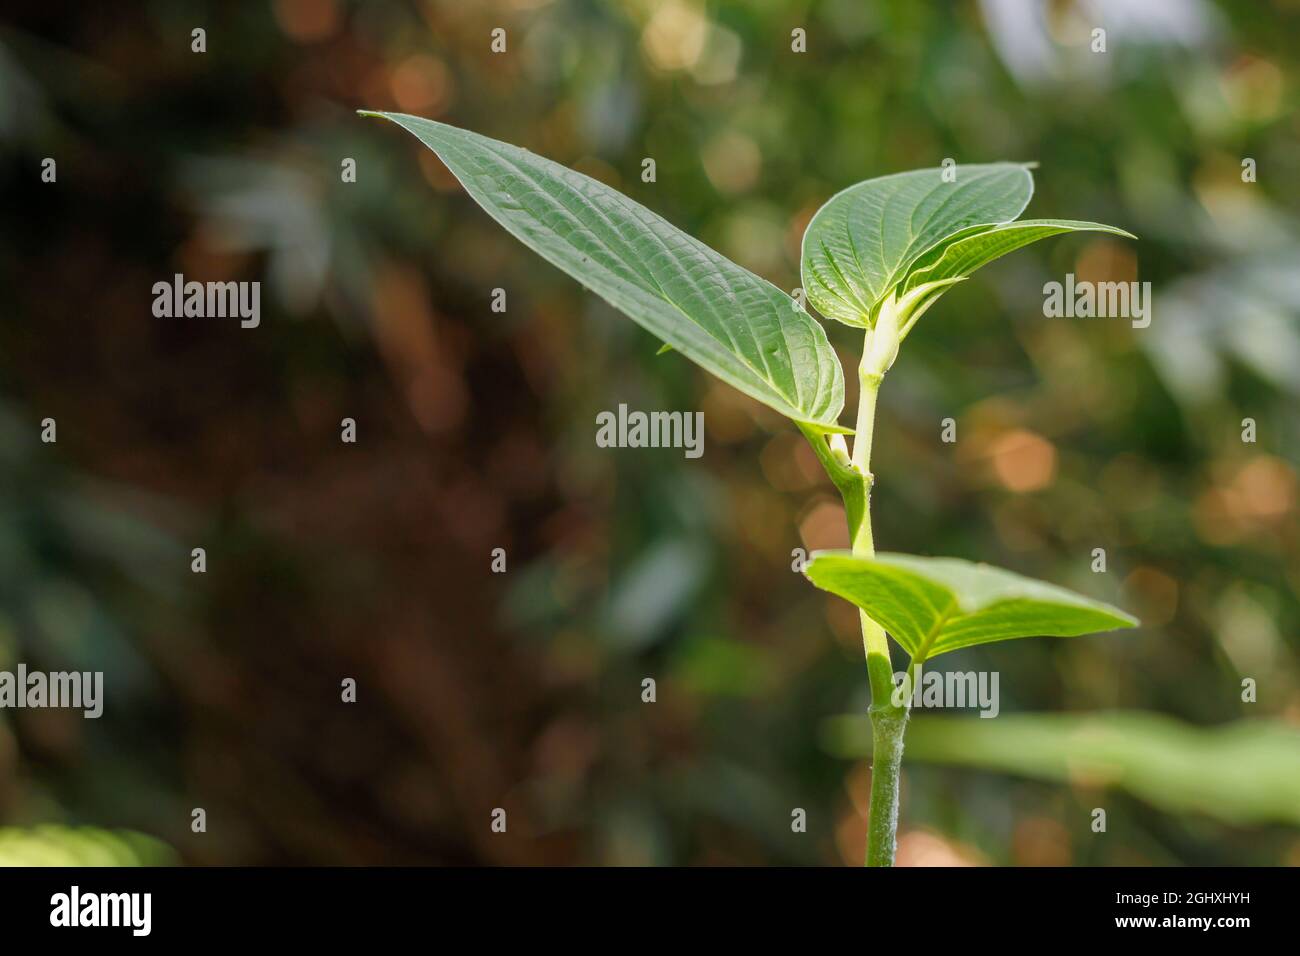 Grass with the type of piper aduncum, has wide green leaf petals Stock Photo